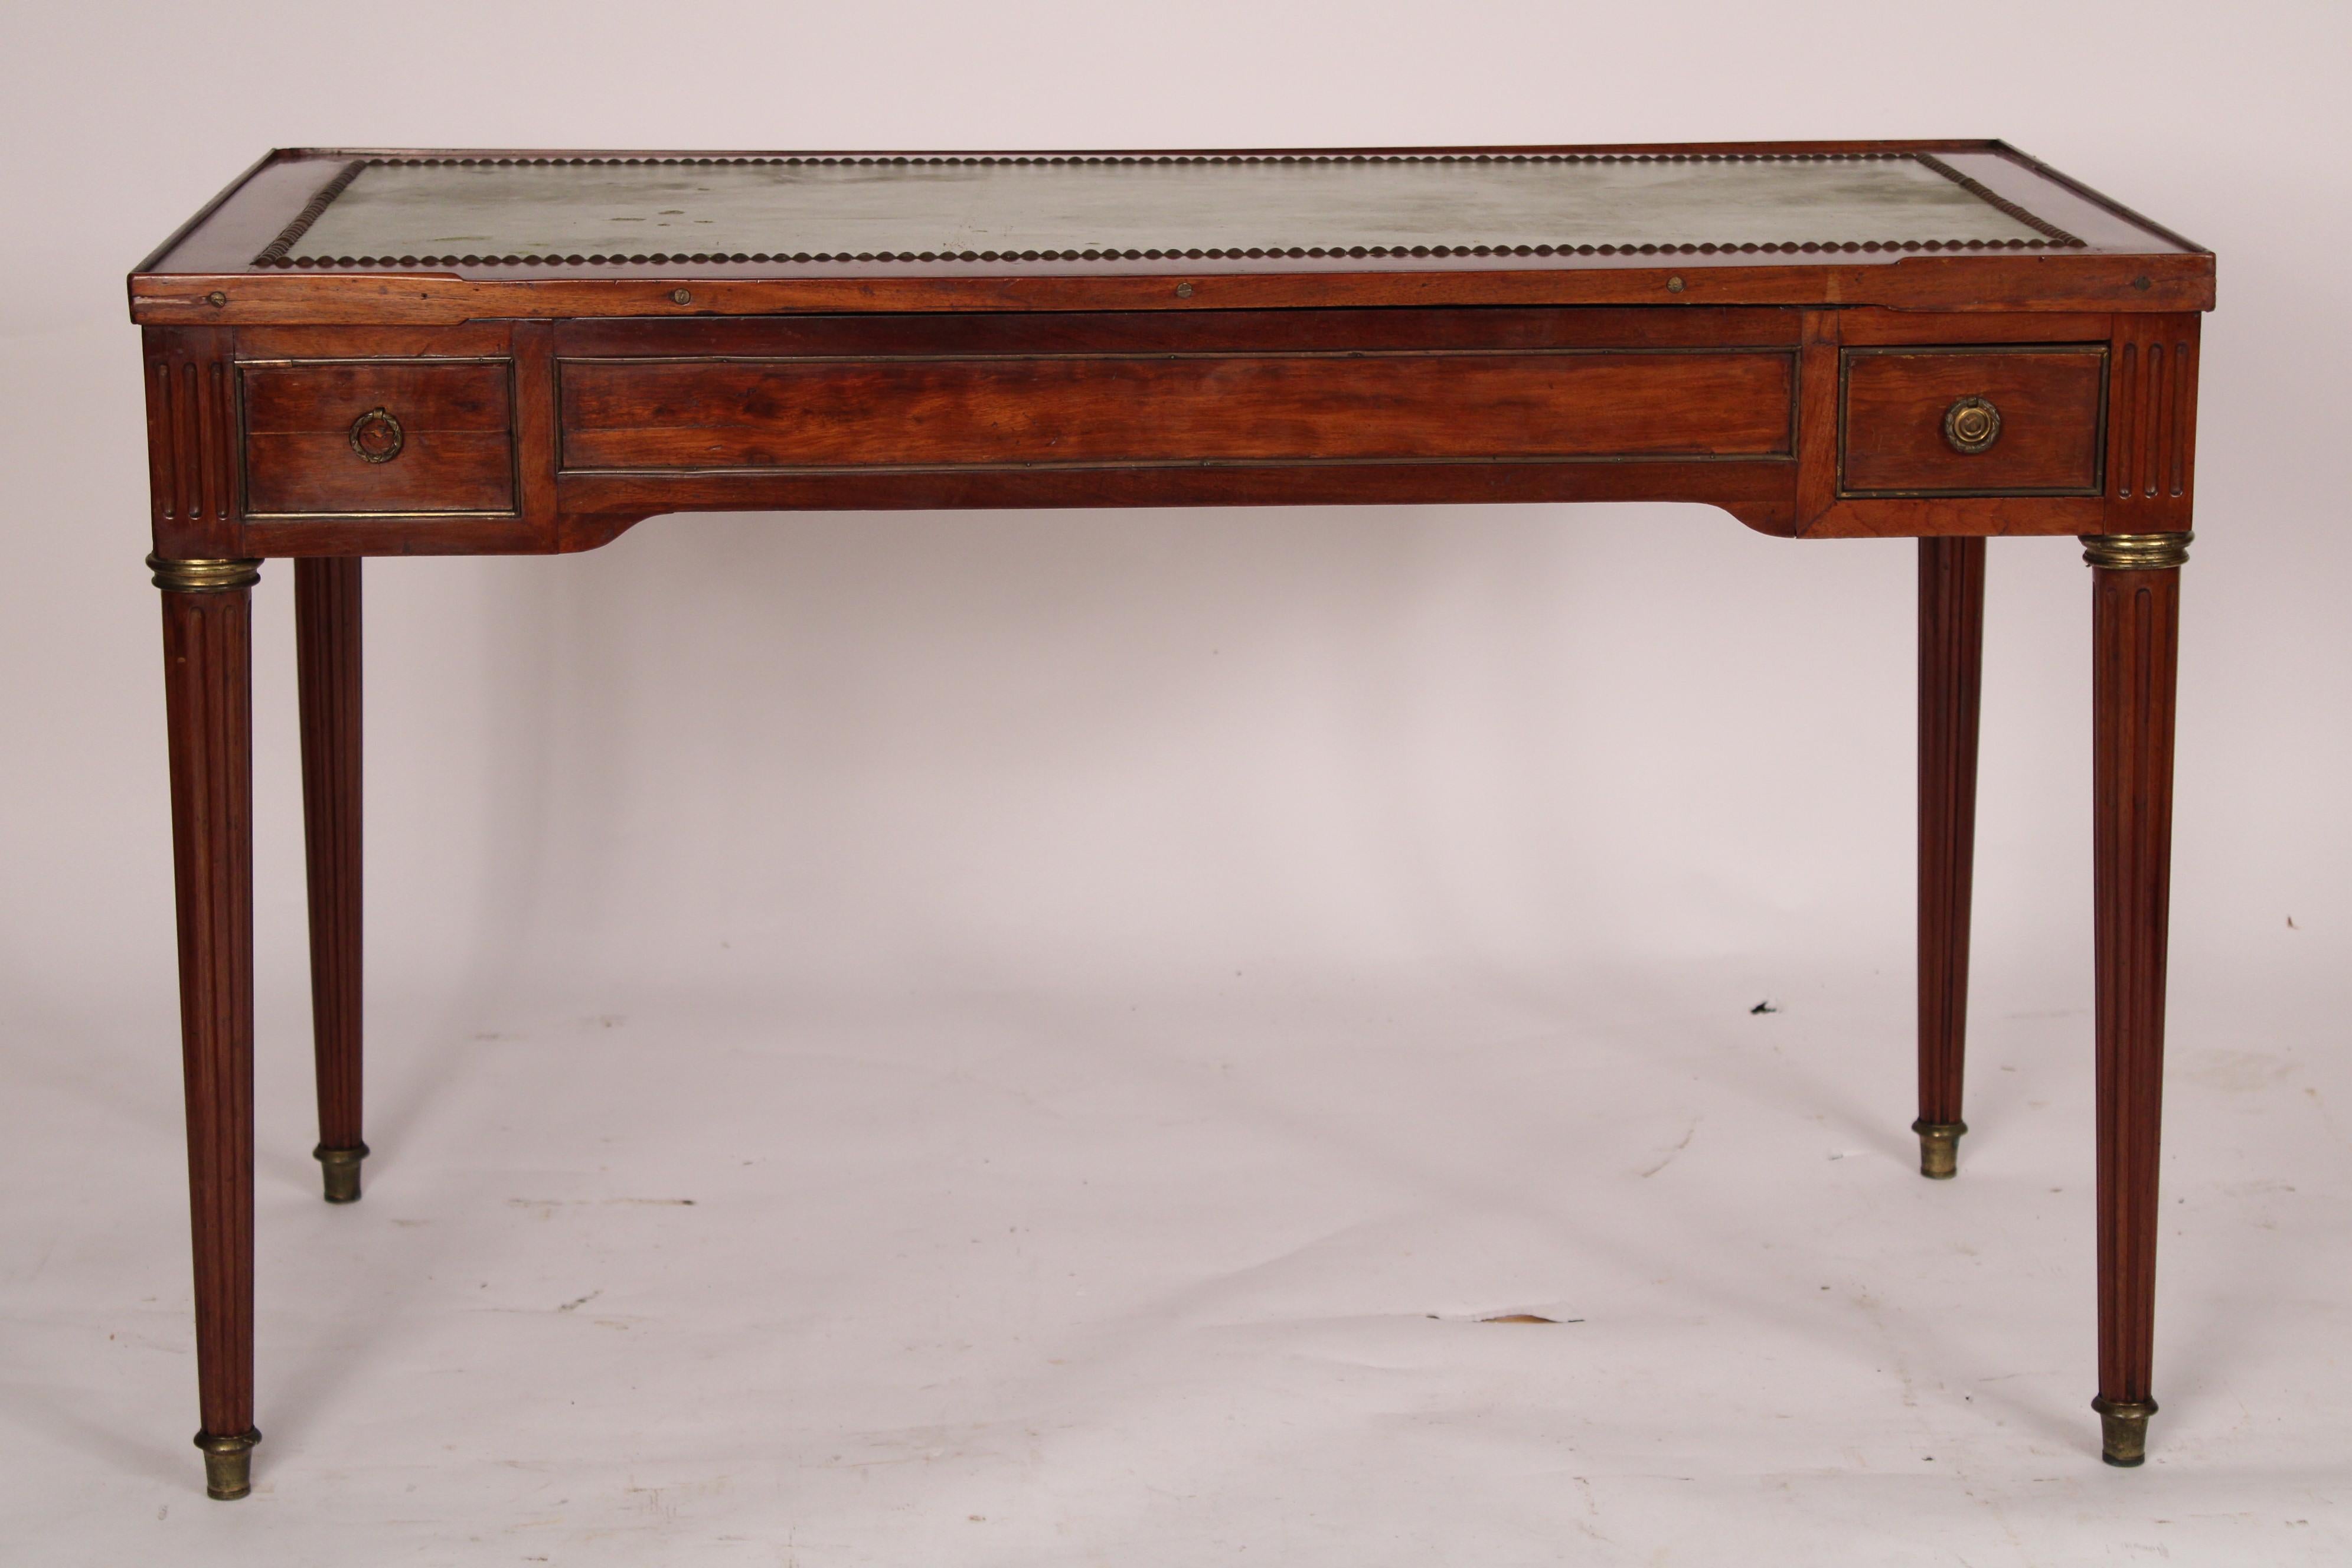 Antique Louis XVI style mahogany brass mounted tric trac / writing table, 19th century. Removeable mahogany top inset with faux leather, frieze with brass mounted drawers, drawer on the right side pulls out the center and left drawer fronts are